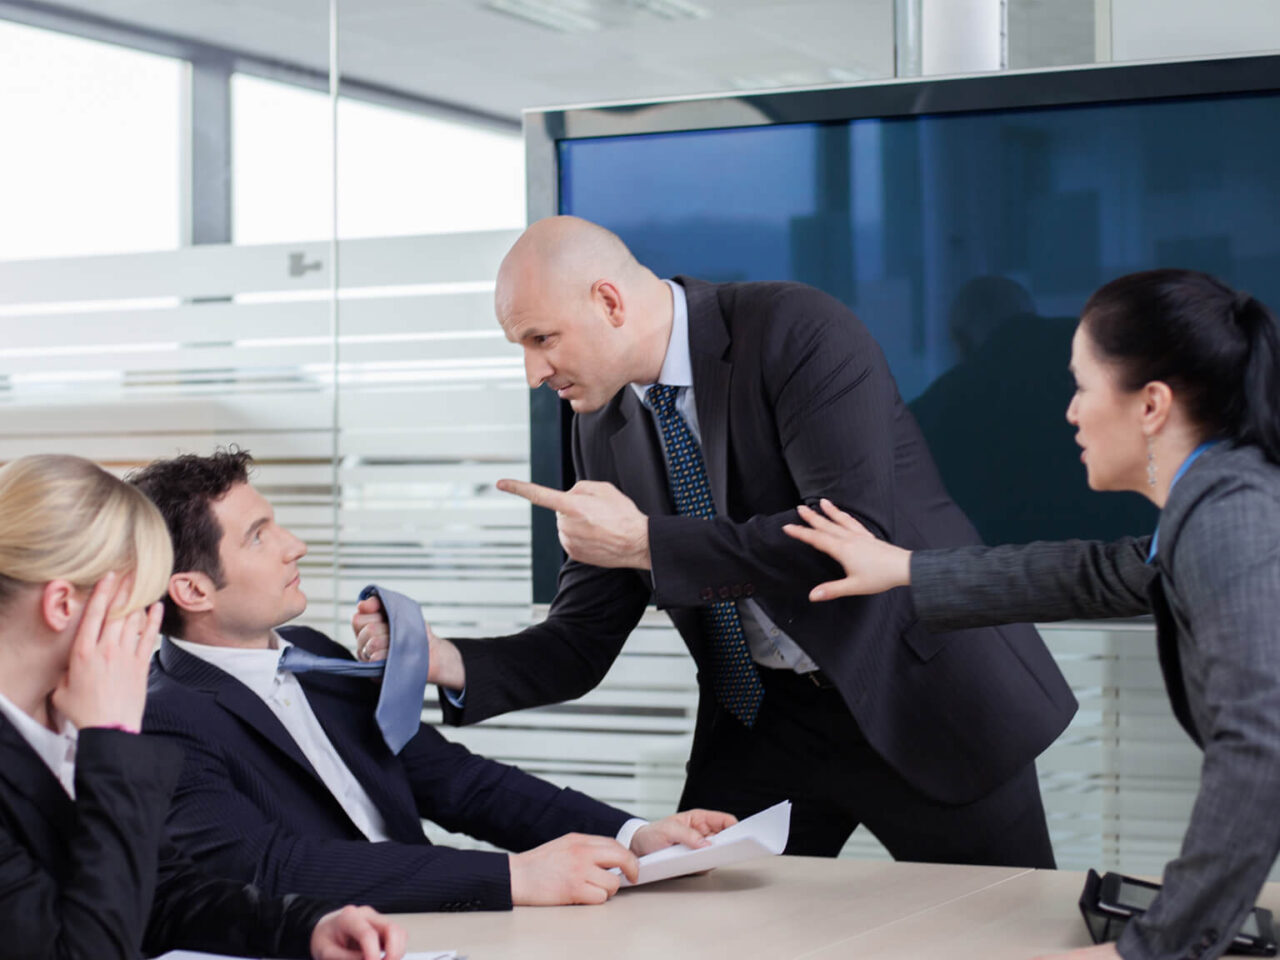 Businessman threatening colleague while other coworkers attempt to hold him back